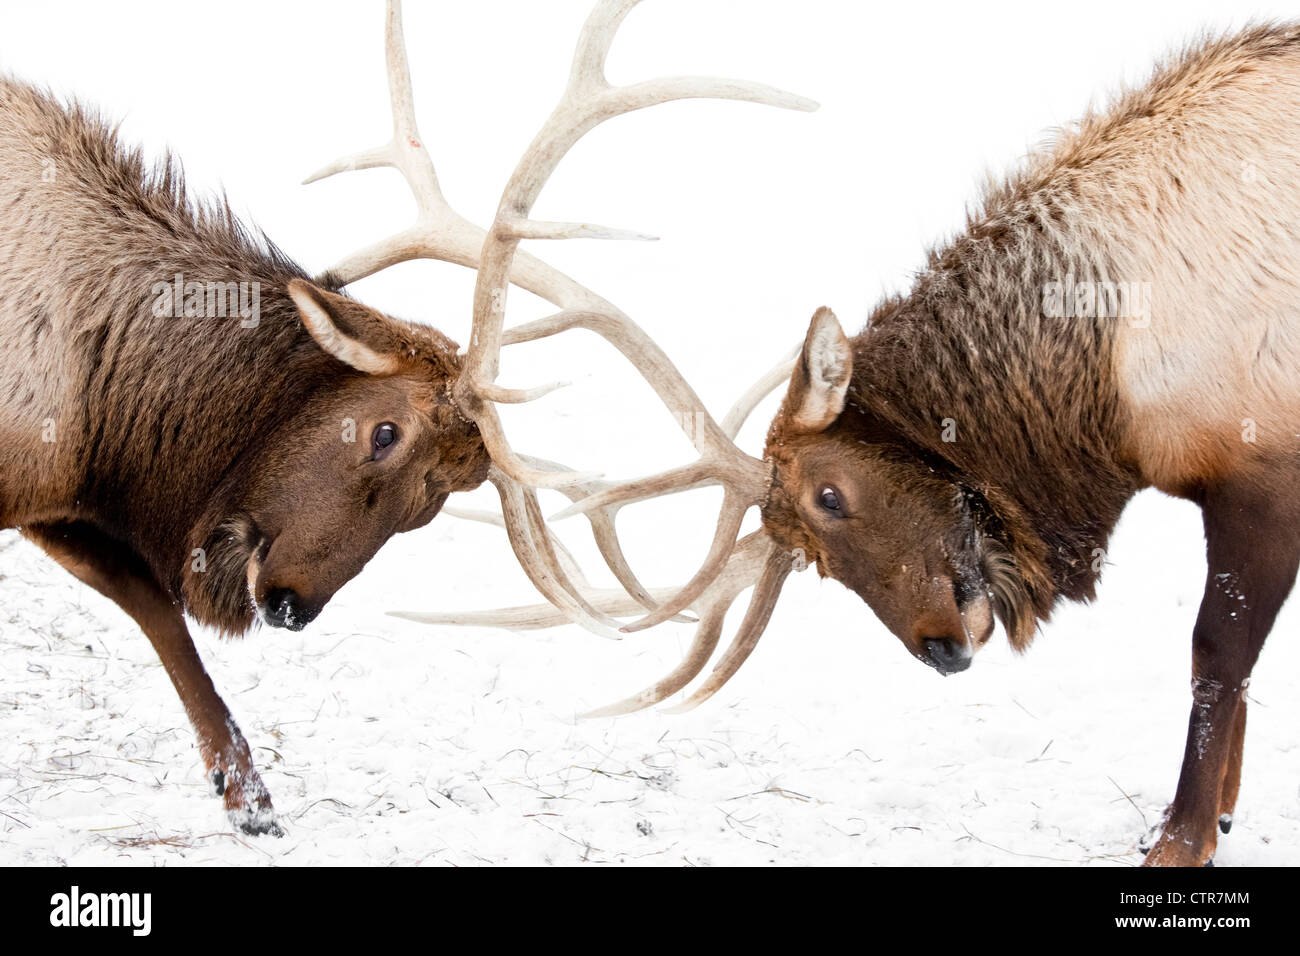 CAPTIVE: A pair of large Rocky Mountain elk lock antlers and fight, Alaska Wildlife Conservation Center, Alaska, Winter Stock Photo